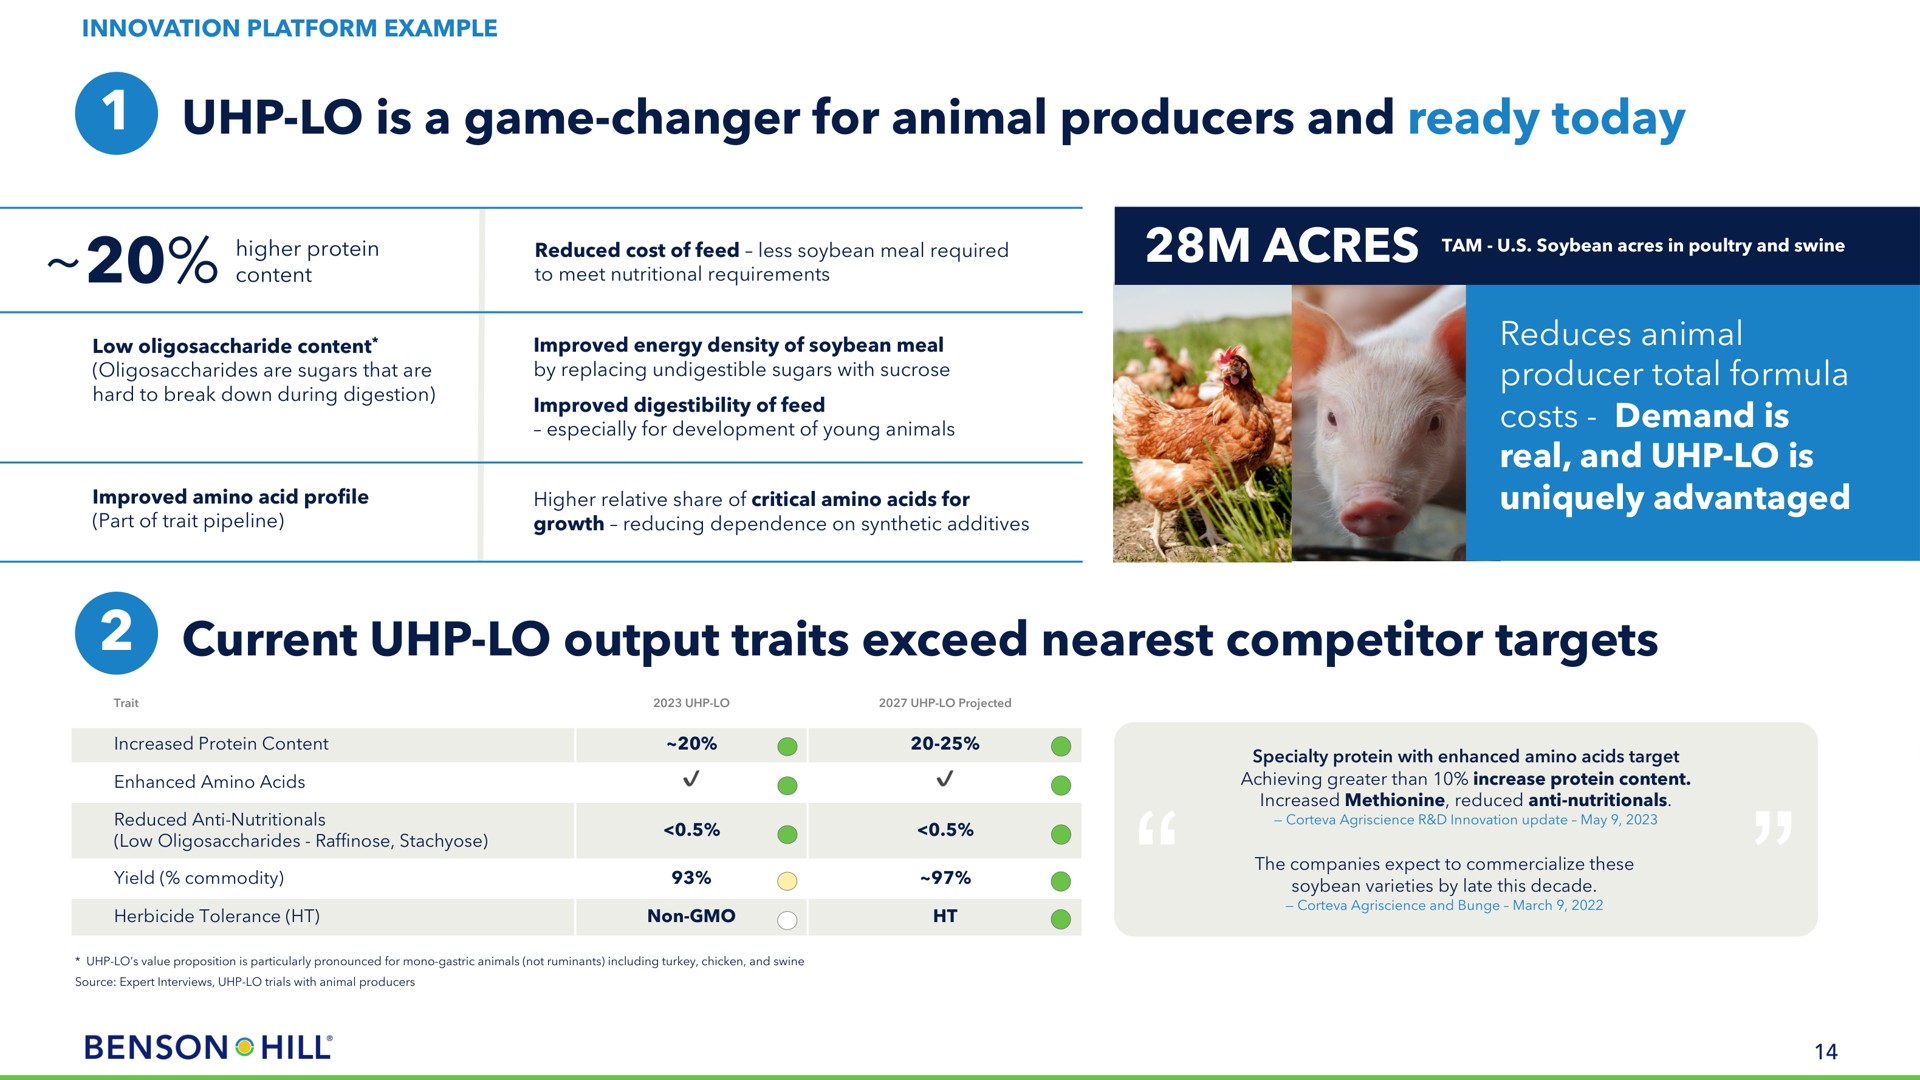 is a game changer for animal producers and ready today acres current output traits exceed nearest competitor targets | Benson Hill